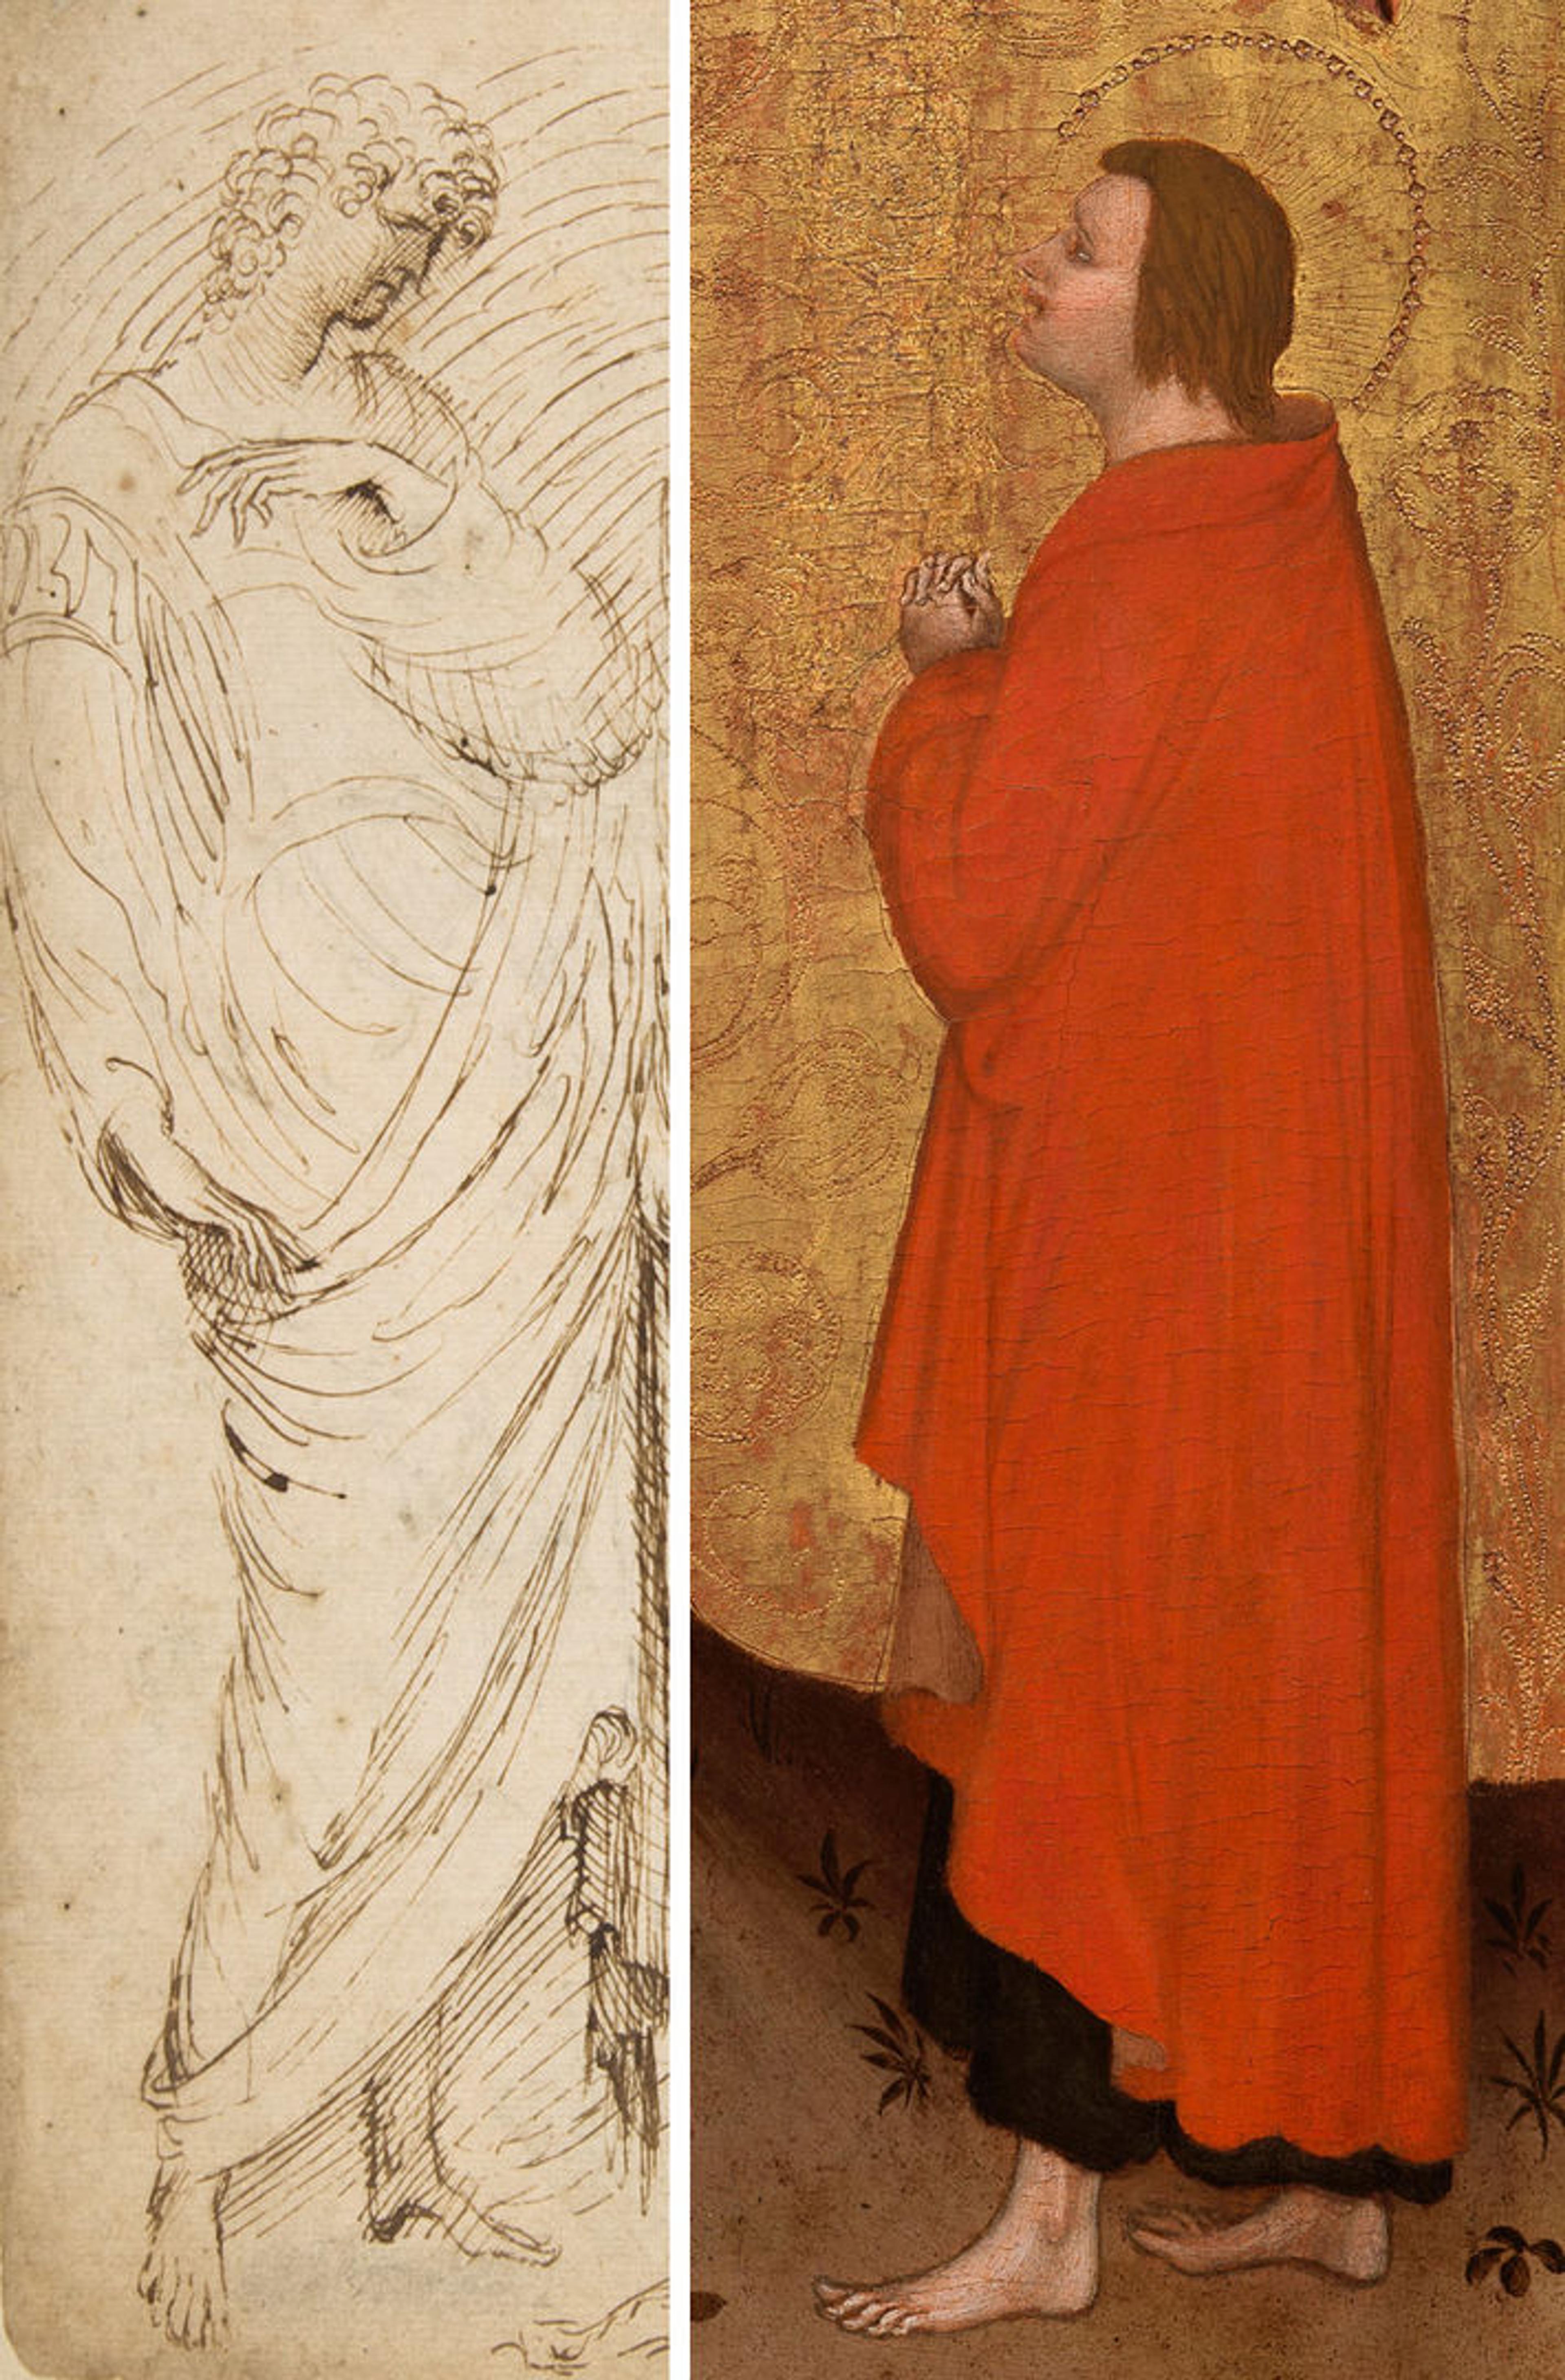 Two detail views of works by Stefano da Verona: at left, a standing male figure dressed in Classical garb; at right, John the Evangelist standing in a red tunic